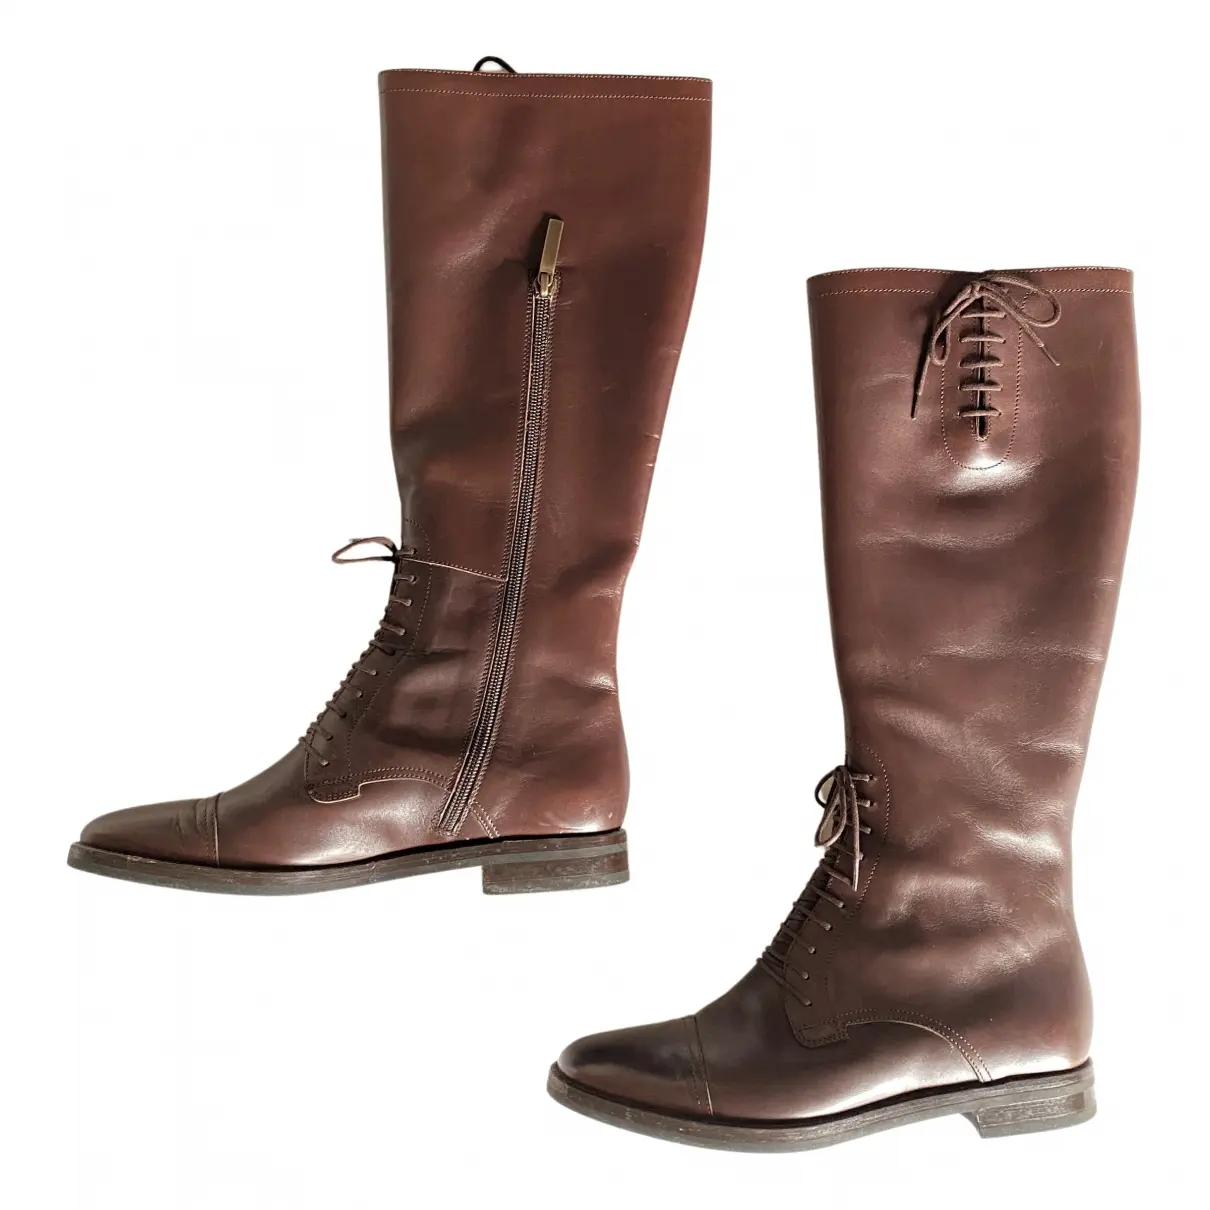 Leather riding boots Fratelli Rossetti